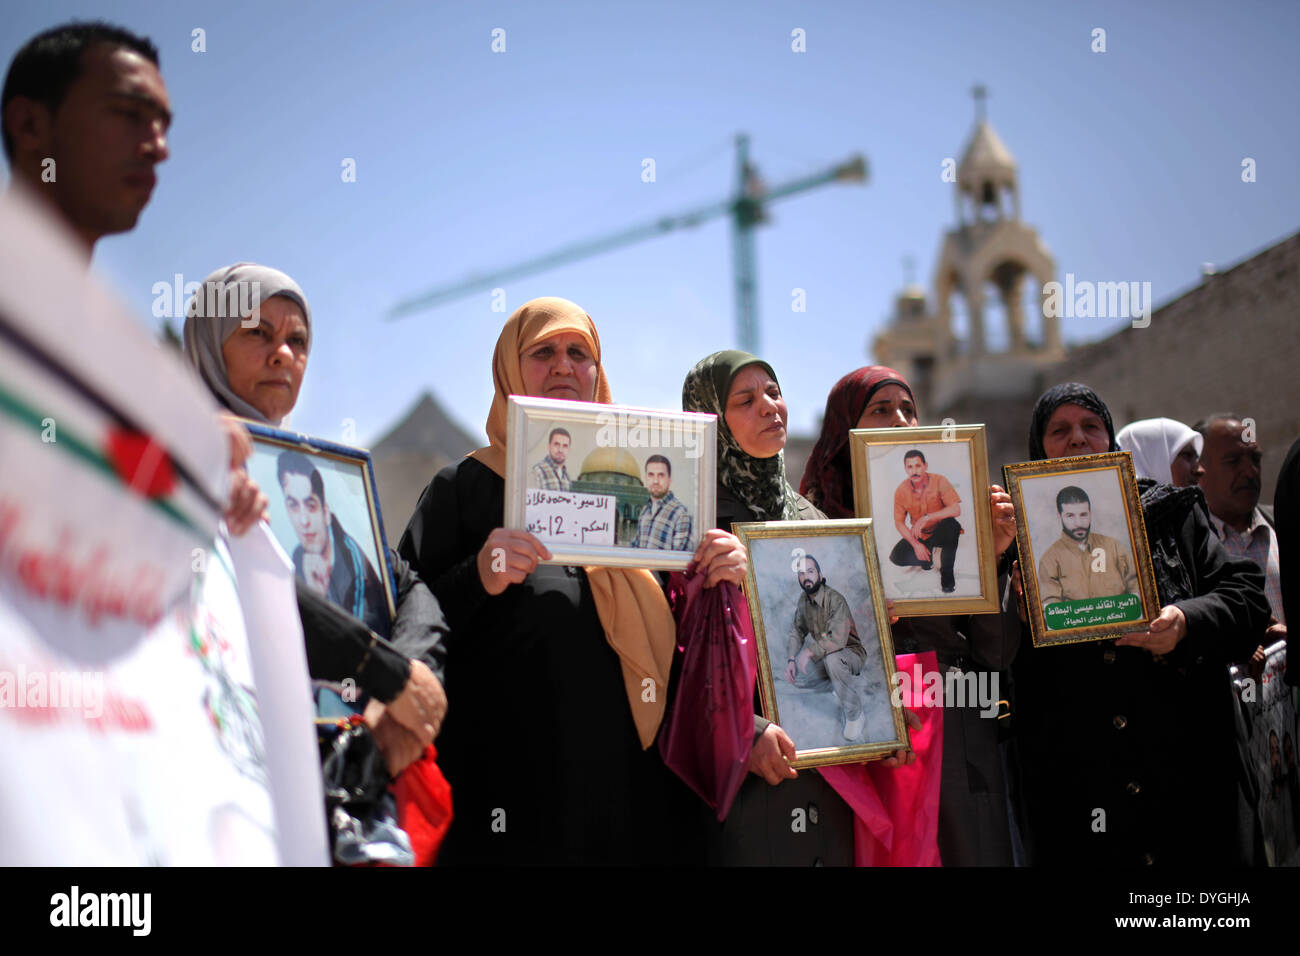 Bethlehem, West Bank city of Bethlehem. 17th Apr, 2014. Palestinians hold pictures of their relatives in Israeli jails as they take part in the commemoration marking Palestinian Prisoner Day, which is a solidarity day with Palestinians in Israeli jails, in the West Bank city of Bethlehem, on April 17, 2014. Credit:  Luay Sababa/Xinhua/Alamy Live News Stock Photo